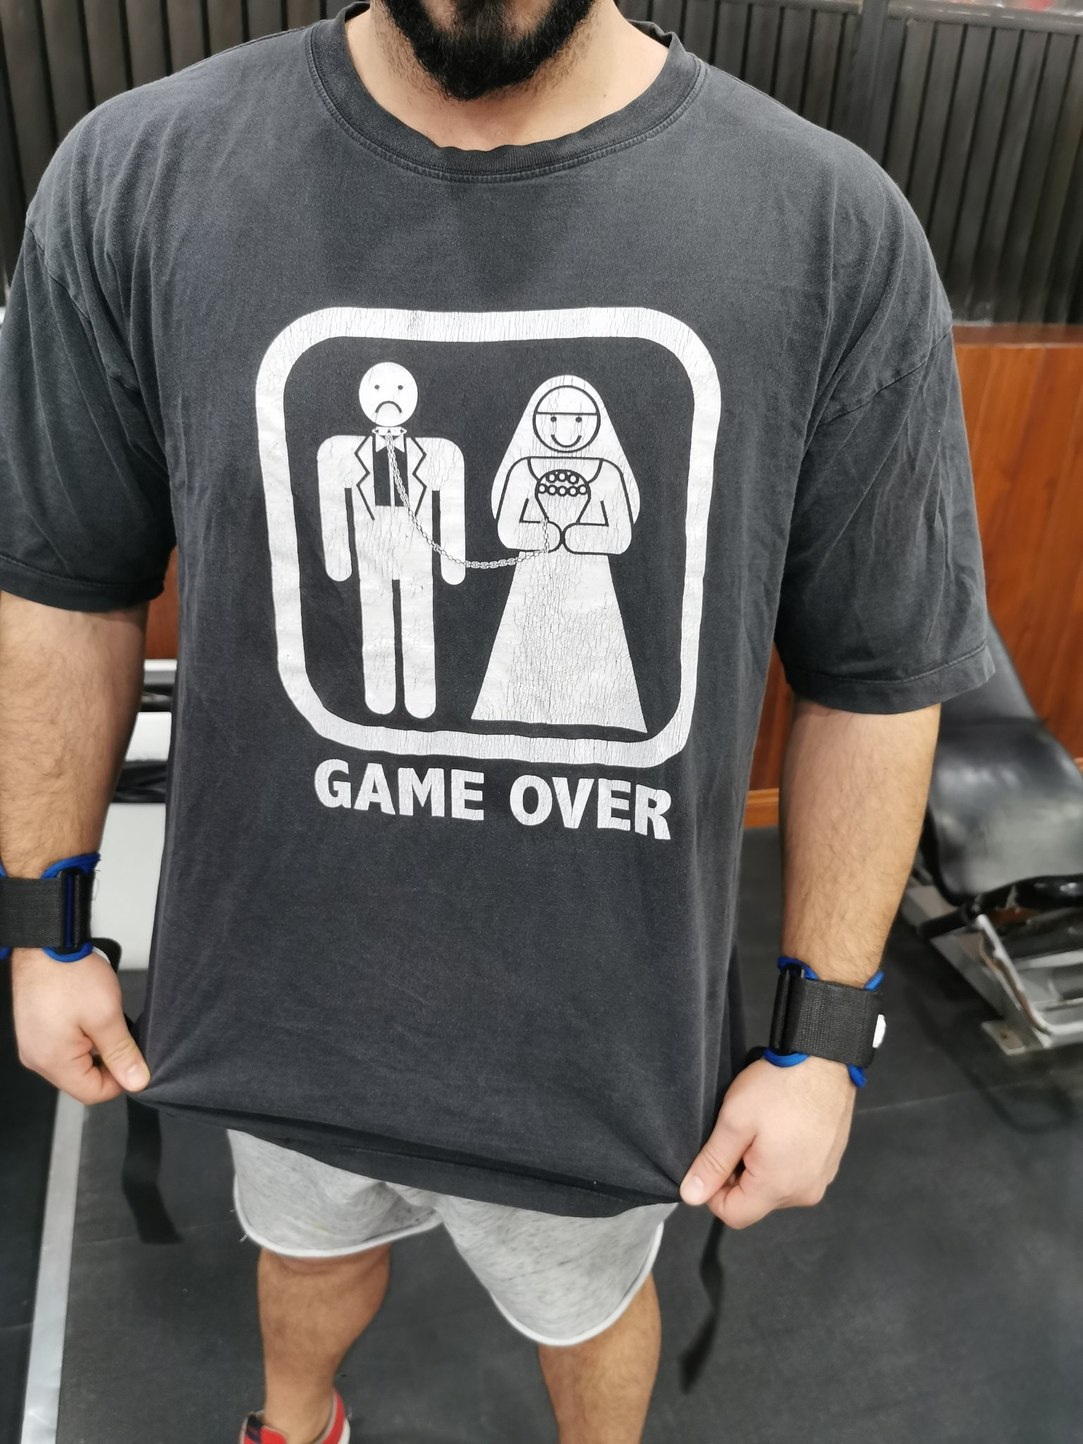 So I see this guy at the gym with this shirt - meme